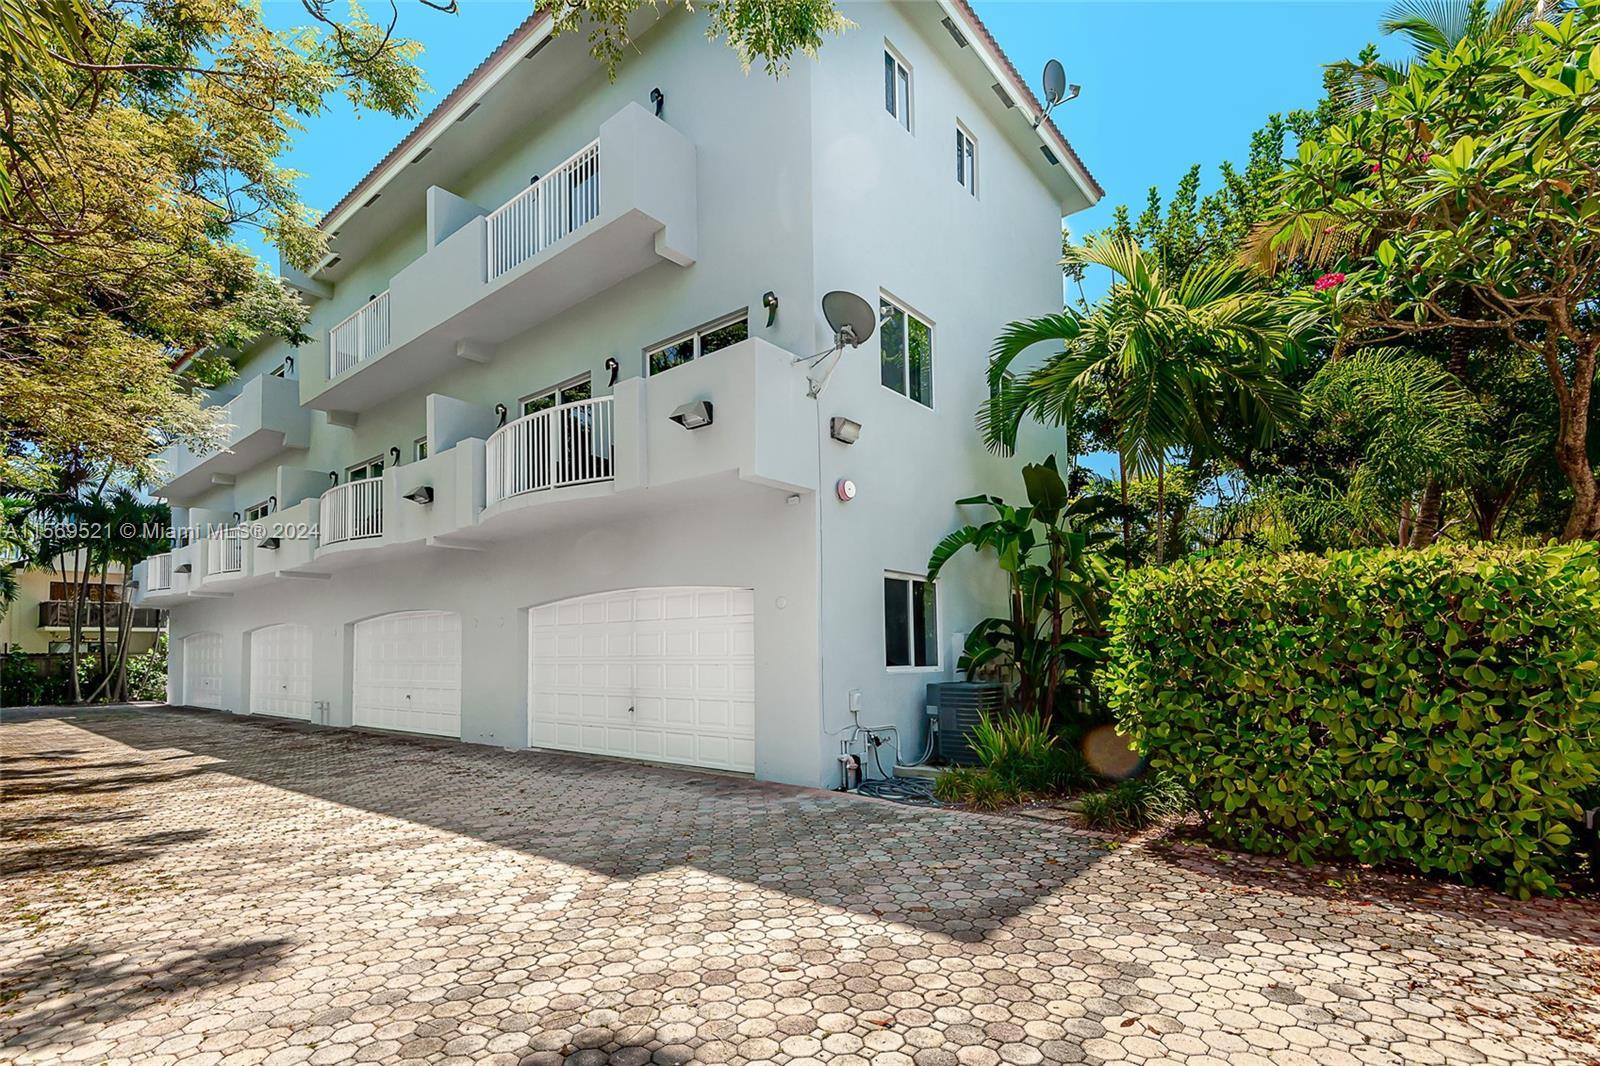 Great opportunity to own a great multifamily (4 plex) property in Coconut Grove built in 2008.  This